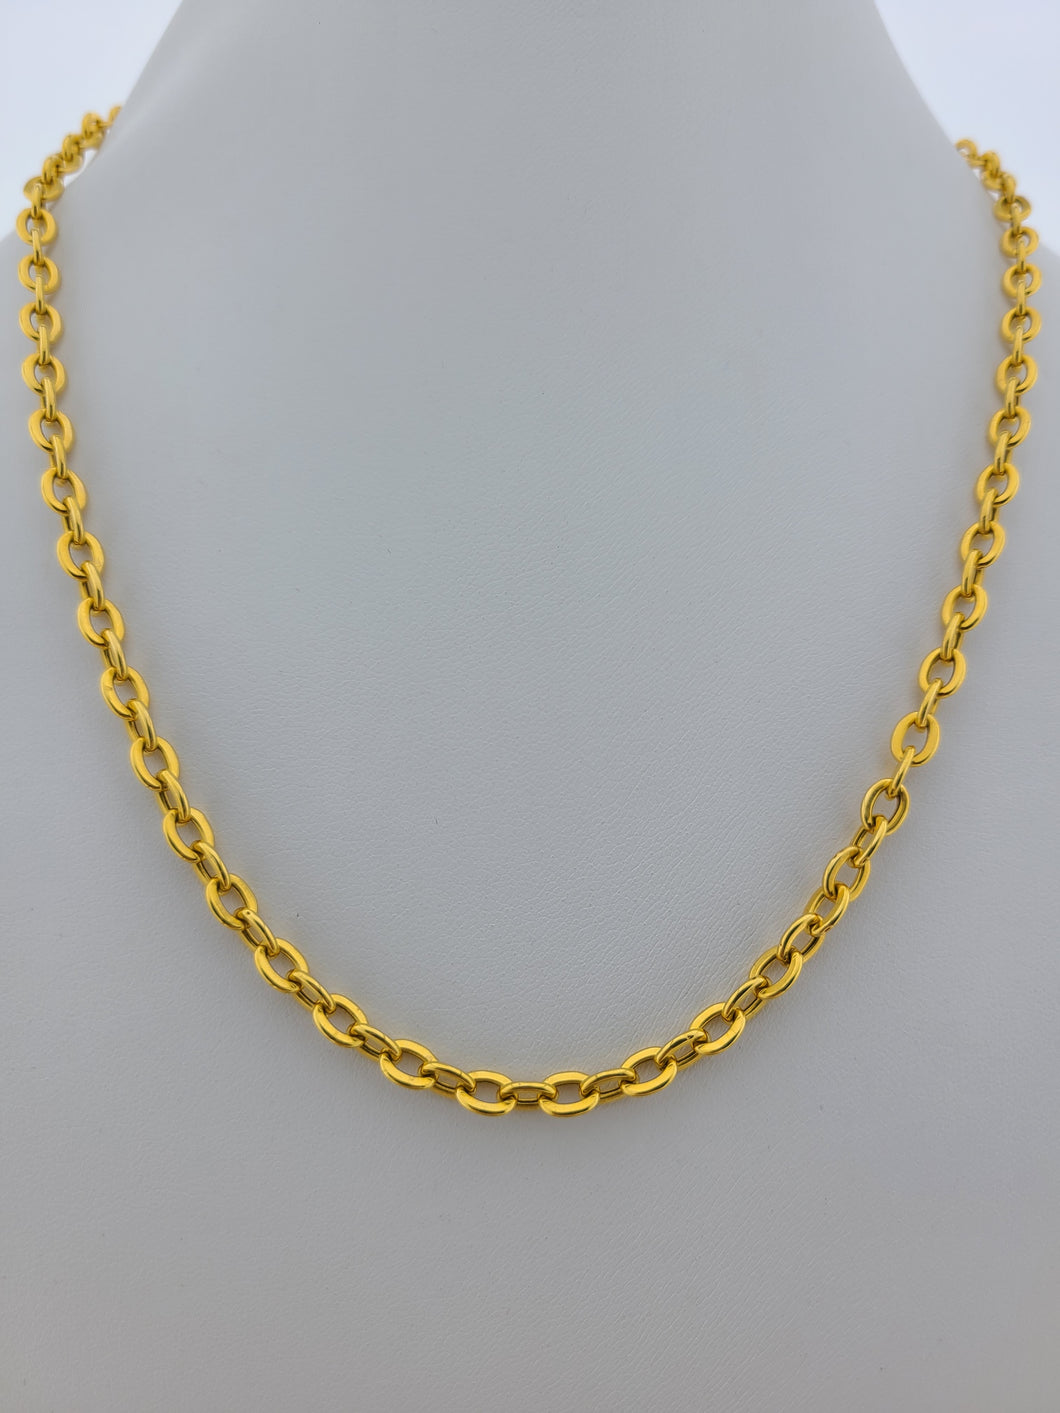 21K Solid Gold Cable Linked Chain C3179 - Royal Dubai Jewellers